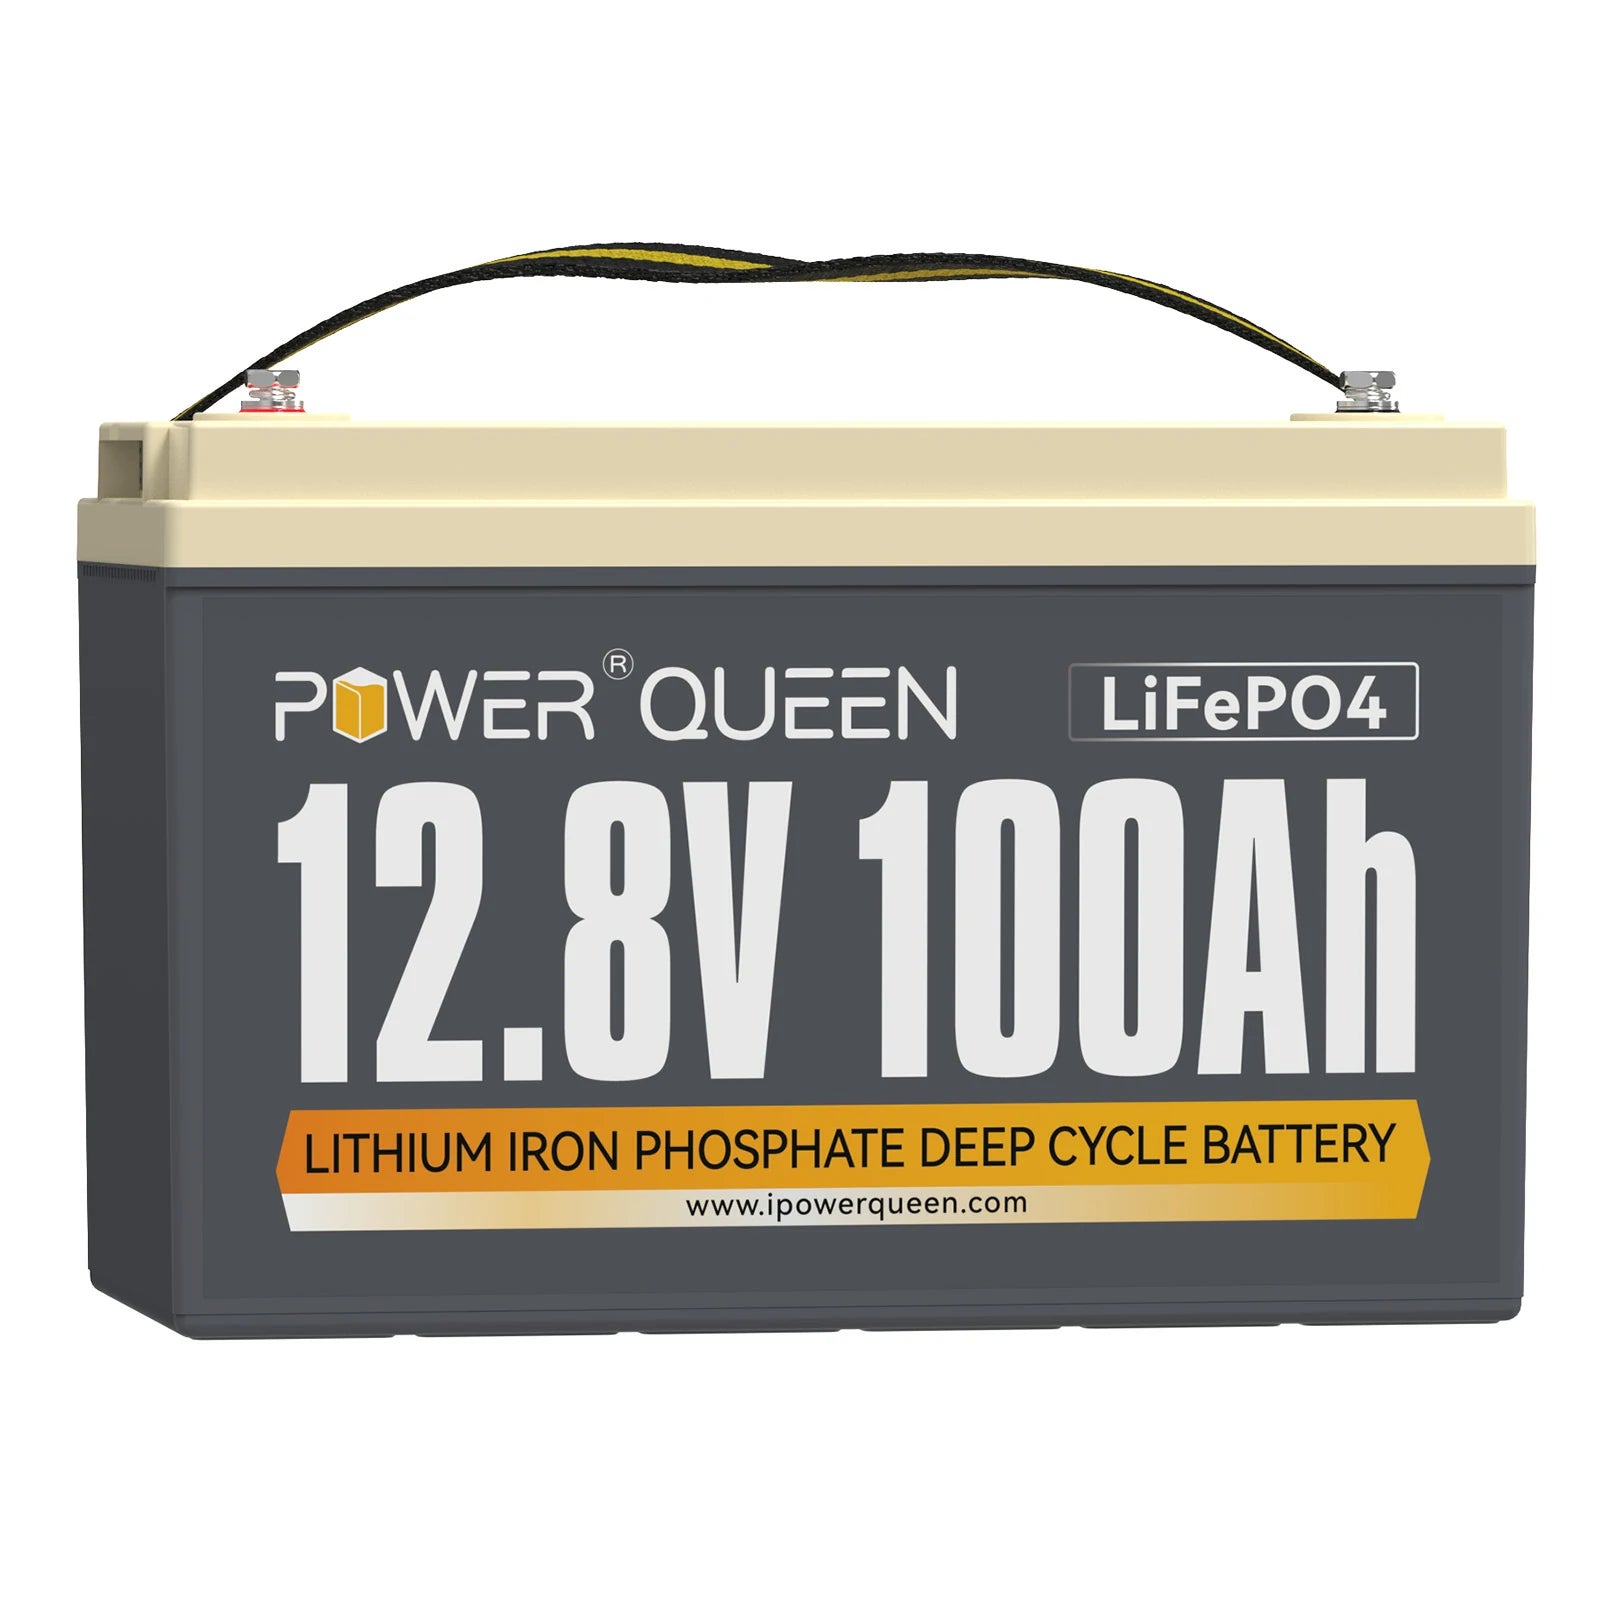 Power-Queen-12V-100Ah-lithium-ion-deep-cycle-battery-canada